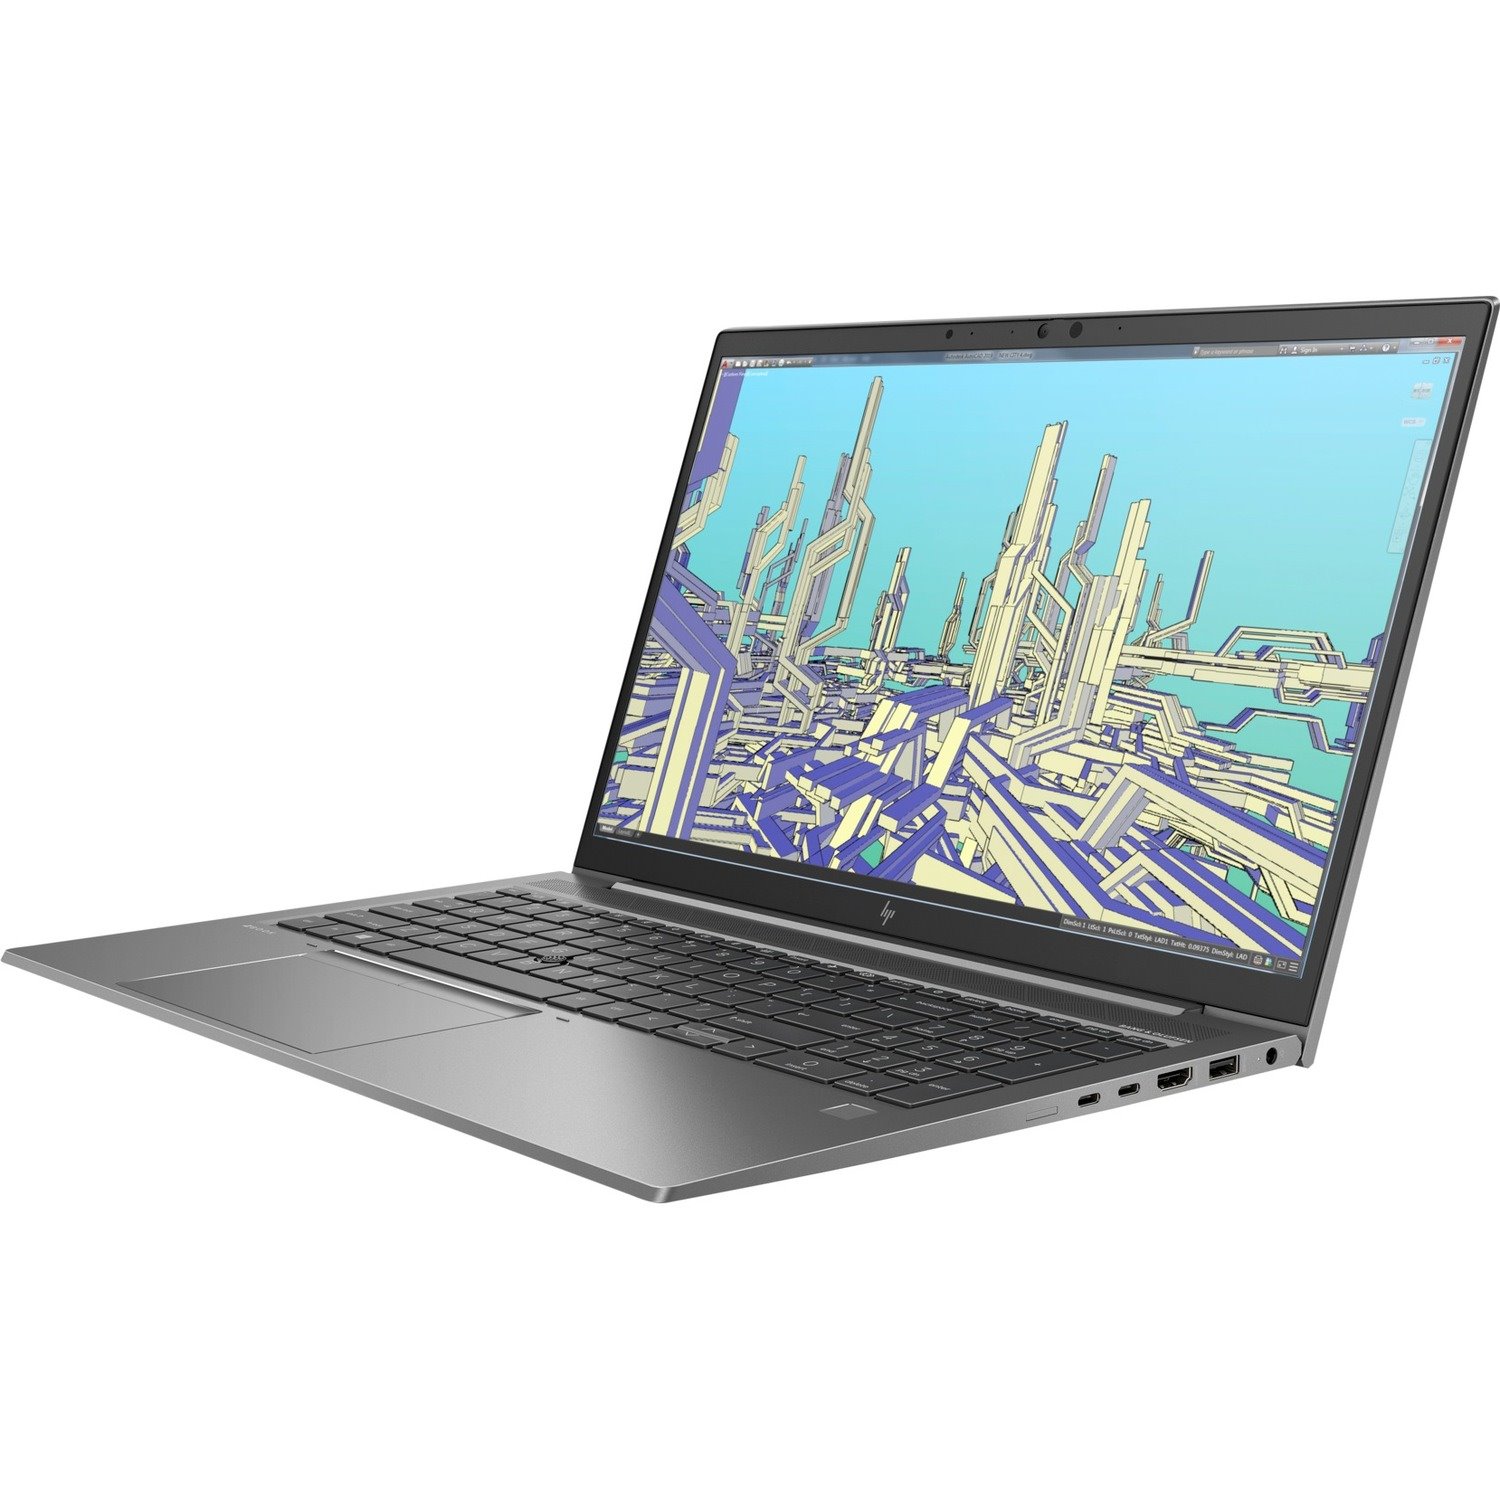 HP ZBook Firefly 15 G8 LTE 15.6" Touchscreen Mobile Workstation - Full HD - 1920 x 1080 - Intel Core i7 11th Gen i7-1165G7 Quad-core (4 Core) 2.80 GHz - 32 GB Total RAM - 512 GB SSD